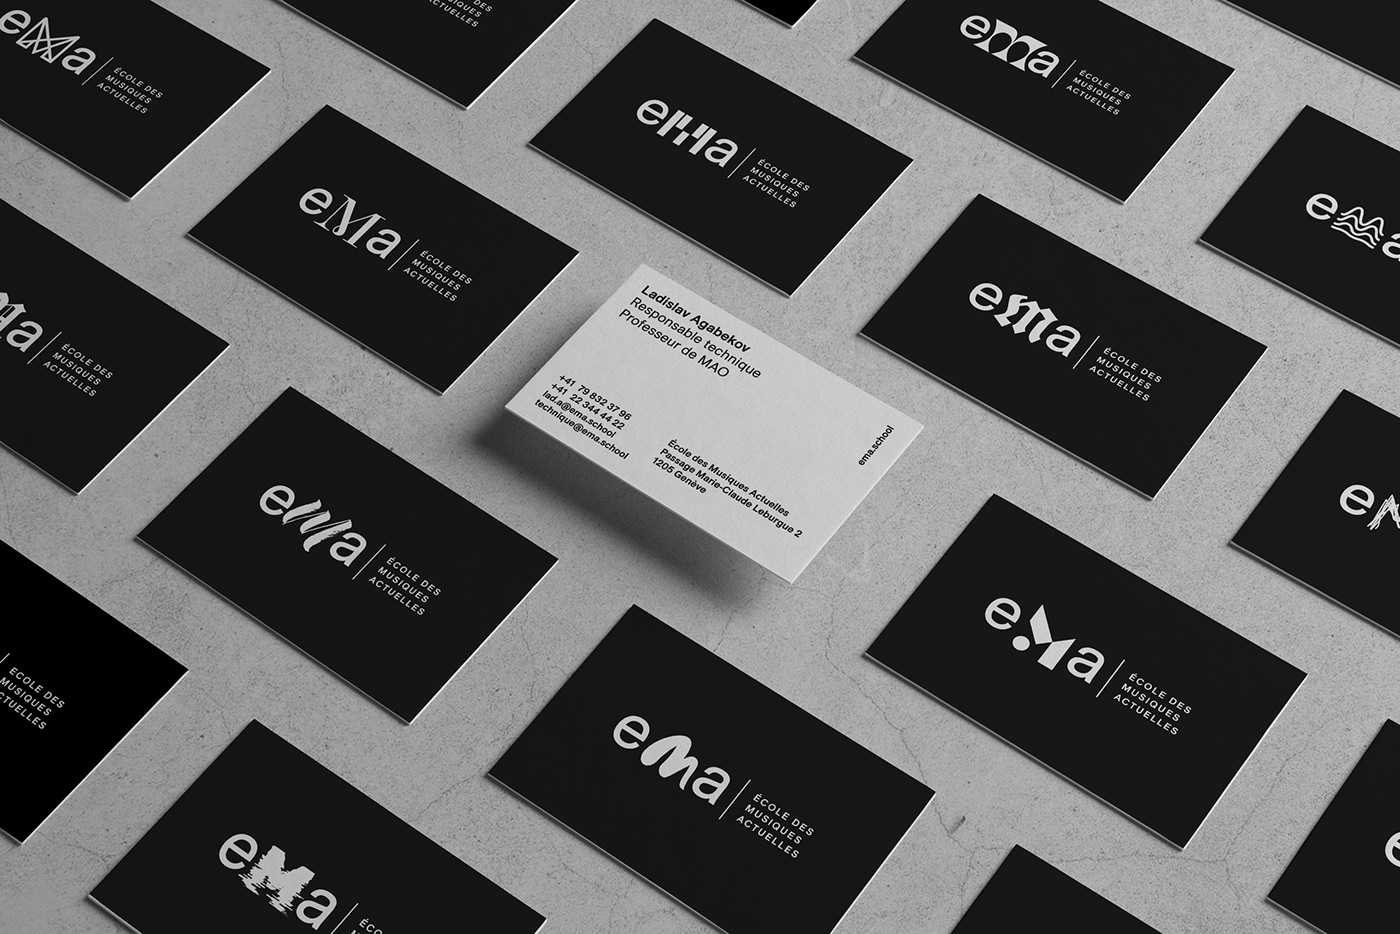 EMA - School of Music - Business cards